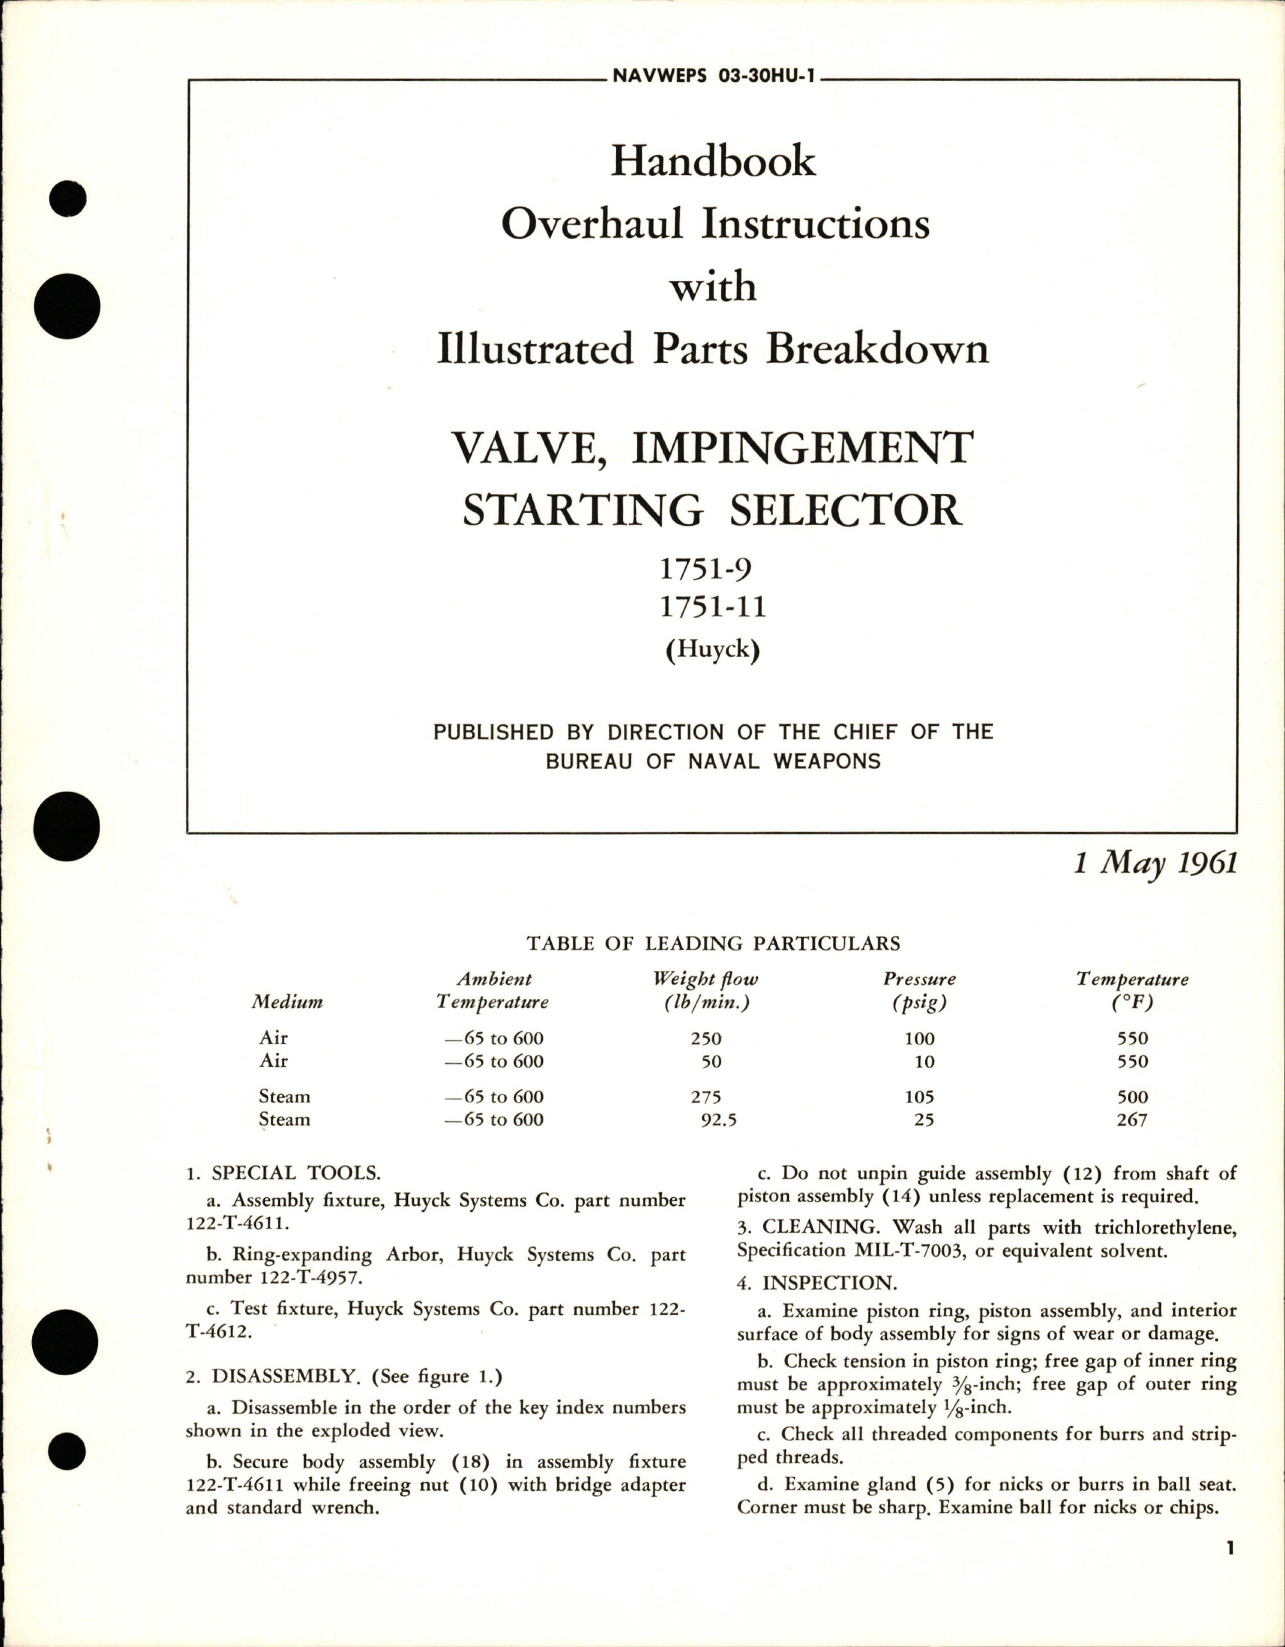 Sample page 1 from AirCorps Library document: Overhaul Instructions with Illustrated Parts Breakdown for Impingement Starting Selector - 1751-9 and 1751-11